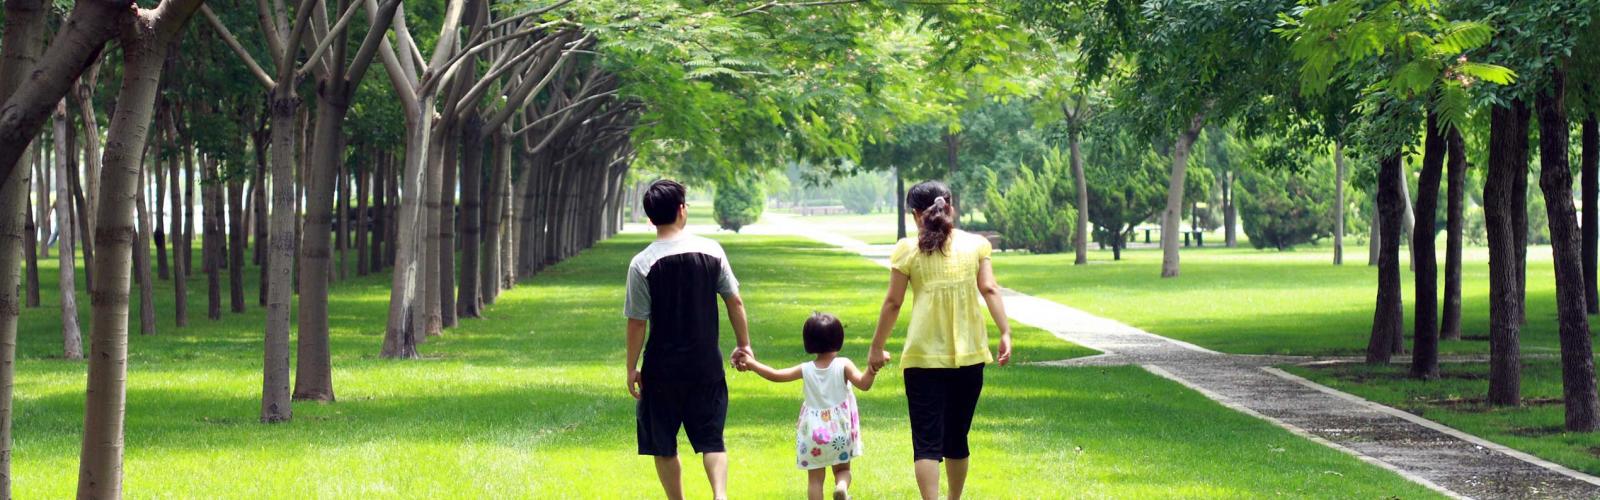 Family walking in a green park